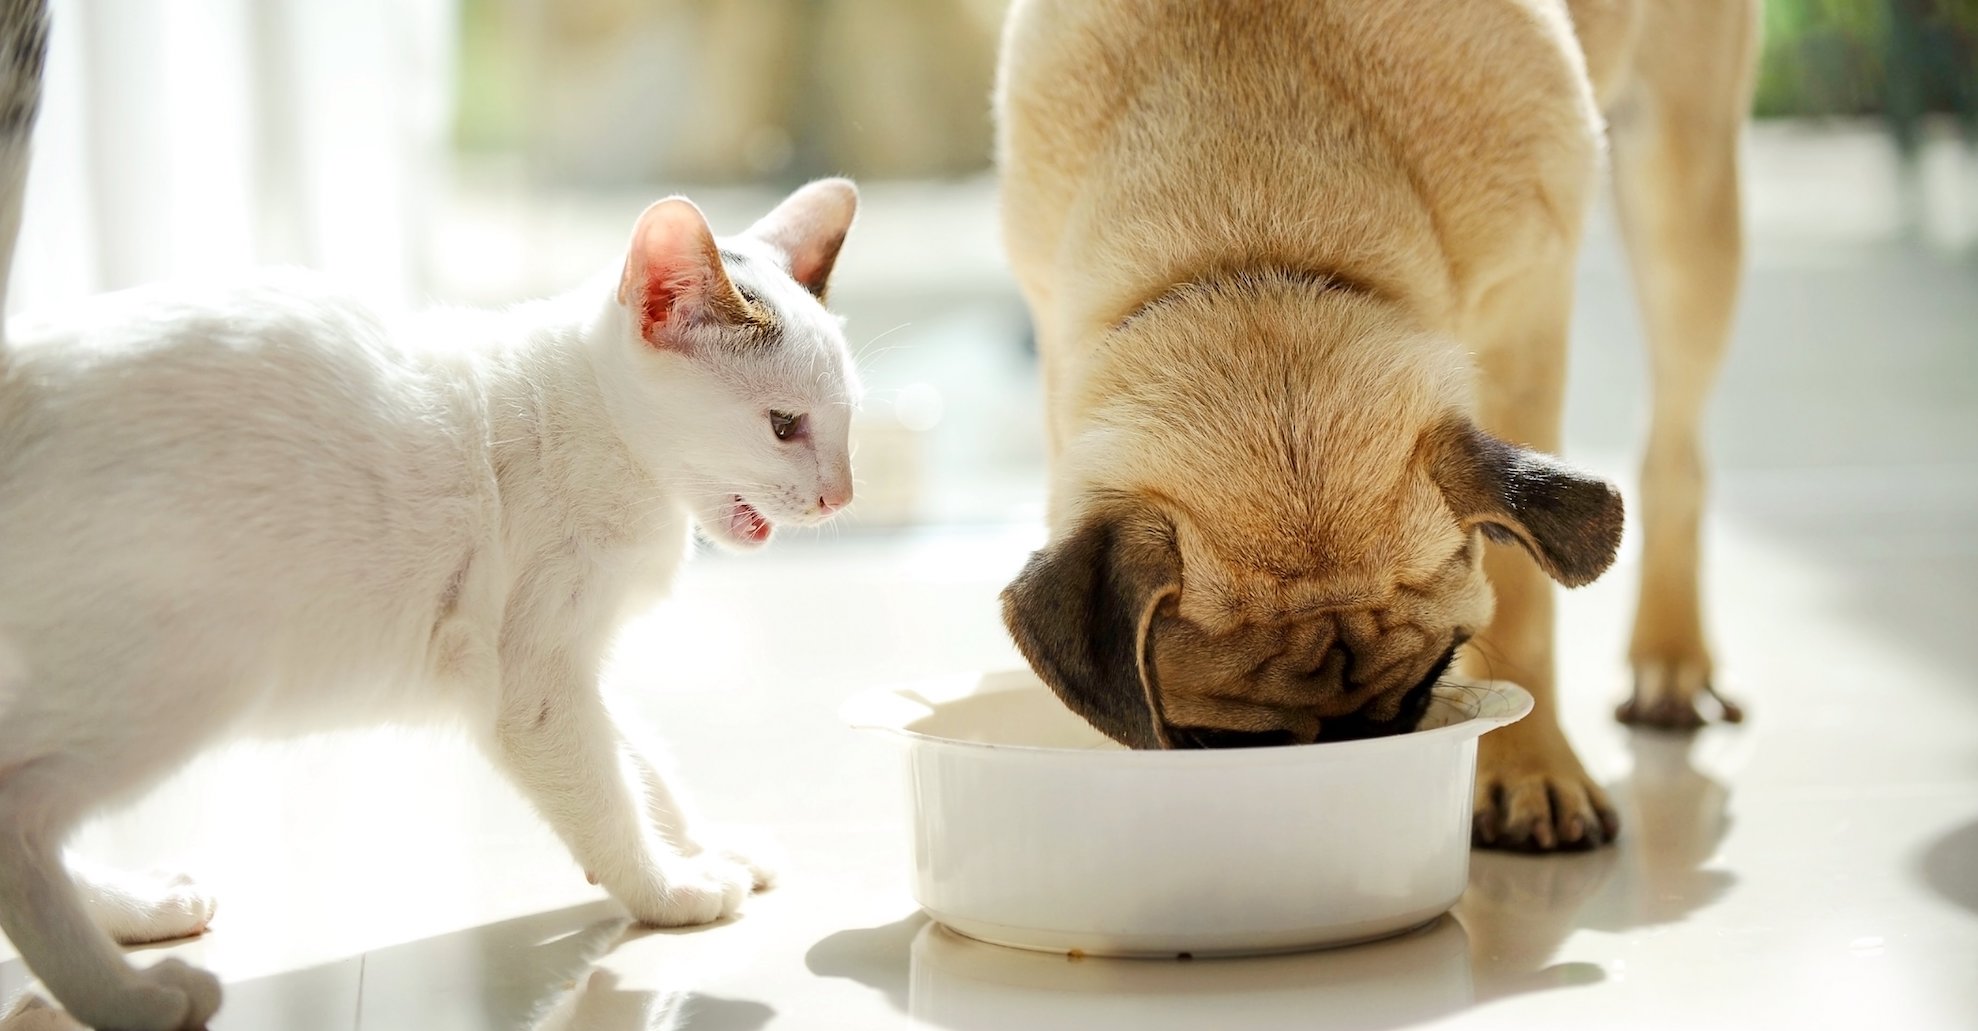 cat diet can cats eat dog food